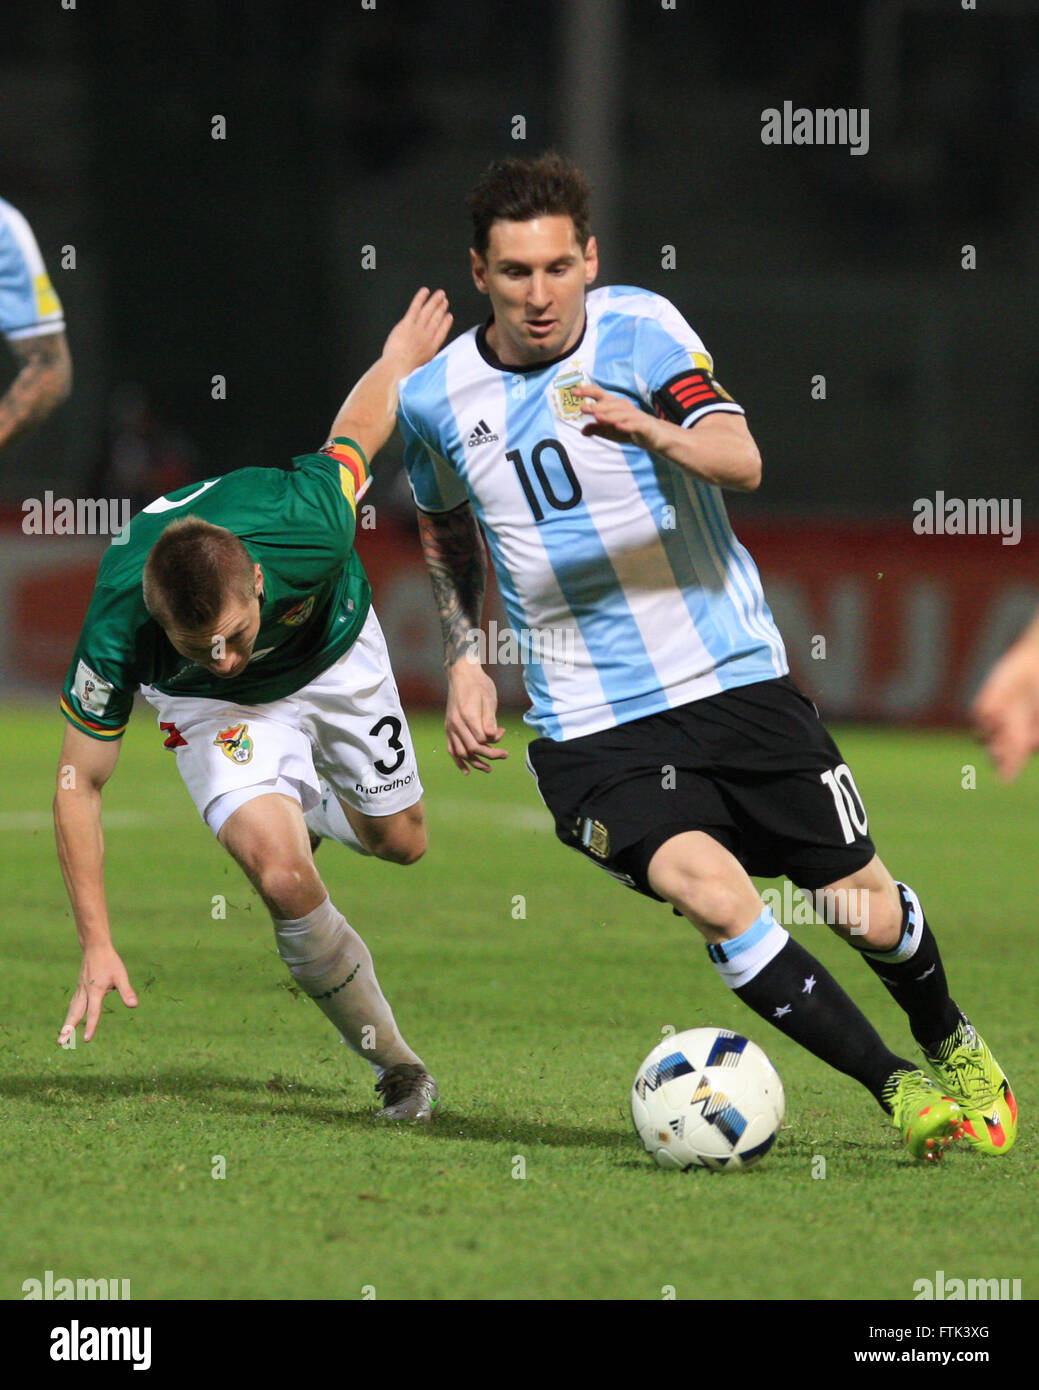 Cordoba, Argentina. 29th Mar, 2016. Argentina's Lionel Messi (R) vies with Bolivia's Alejandro Chumacero during their qualifying match for 2018 Russia World Cup at Mario Alberto Kempes Stadium in Cordoba, Argentina, on March 29, 2016. Argentina won 2-0. © Martin Zabala/Xinhua/Alamy Live News Stock Photo